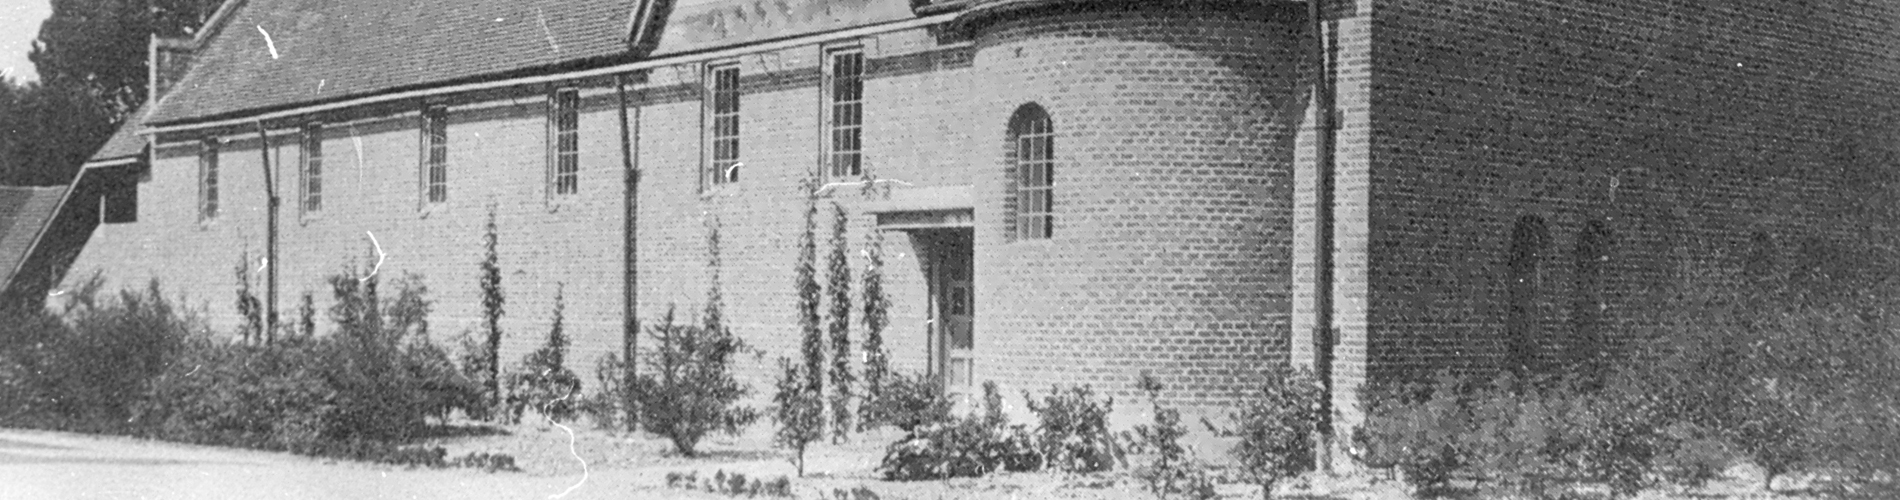 Lupton Hall (Date Unknown)